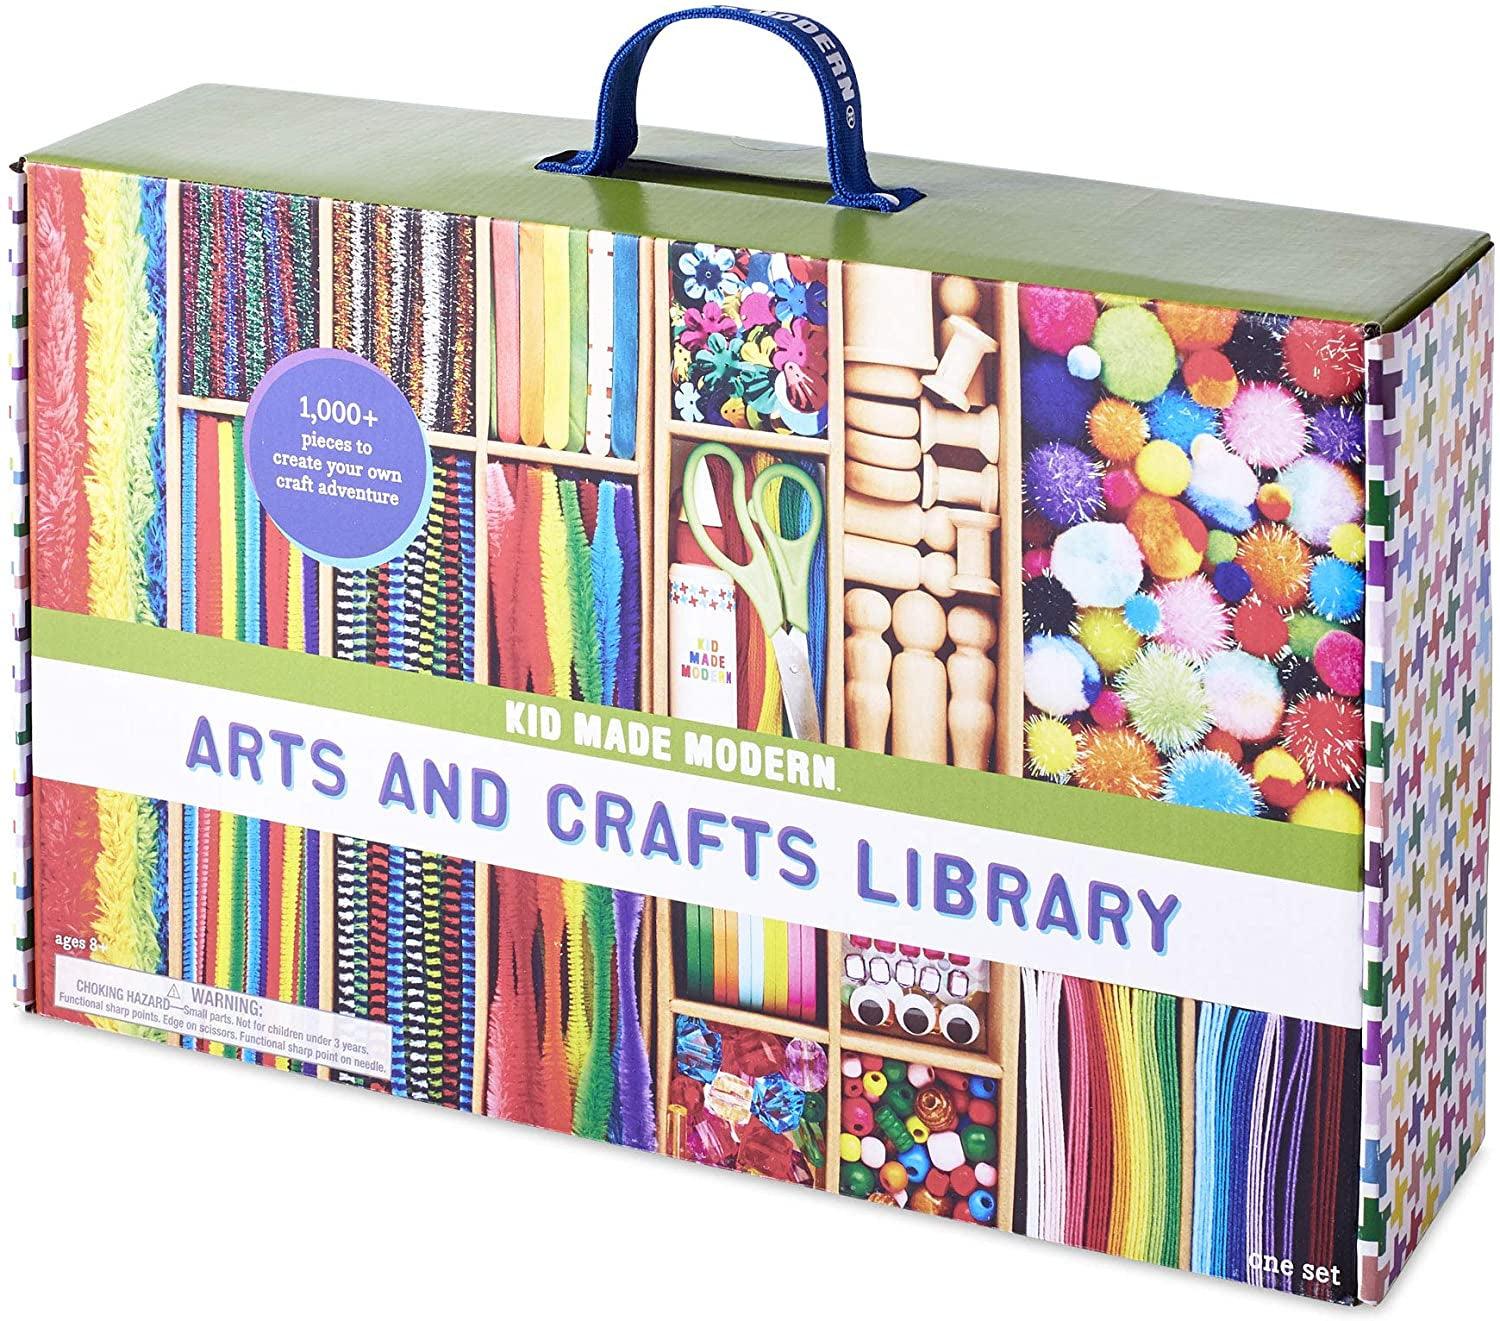 https://woodartsupply.com/cdn/shop/files/arts-and-crafts-supply-library-craft-supplies-learning-activities-kids-brain-boosting-crafting-kit-coloring-kit-woodartsupply-4_0c479313-06a1-45d6-acf3-c39f7cbf0c33.jpg?v=1696140749&width=1946